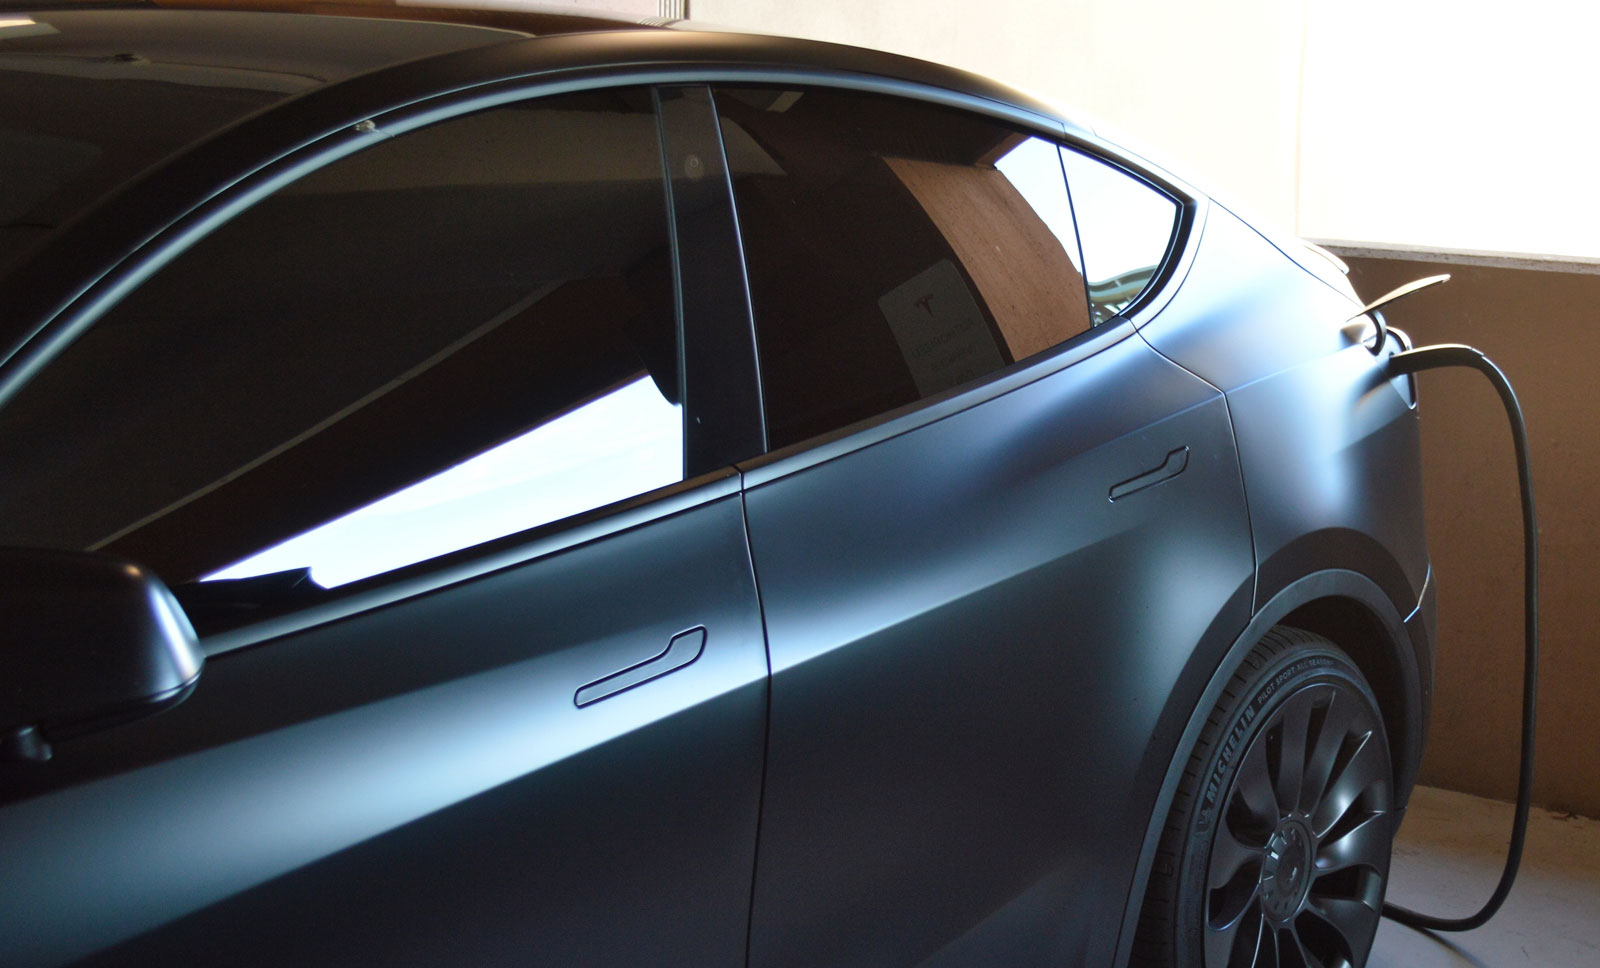 Things you need to know about chrome vinyl wrap film